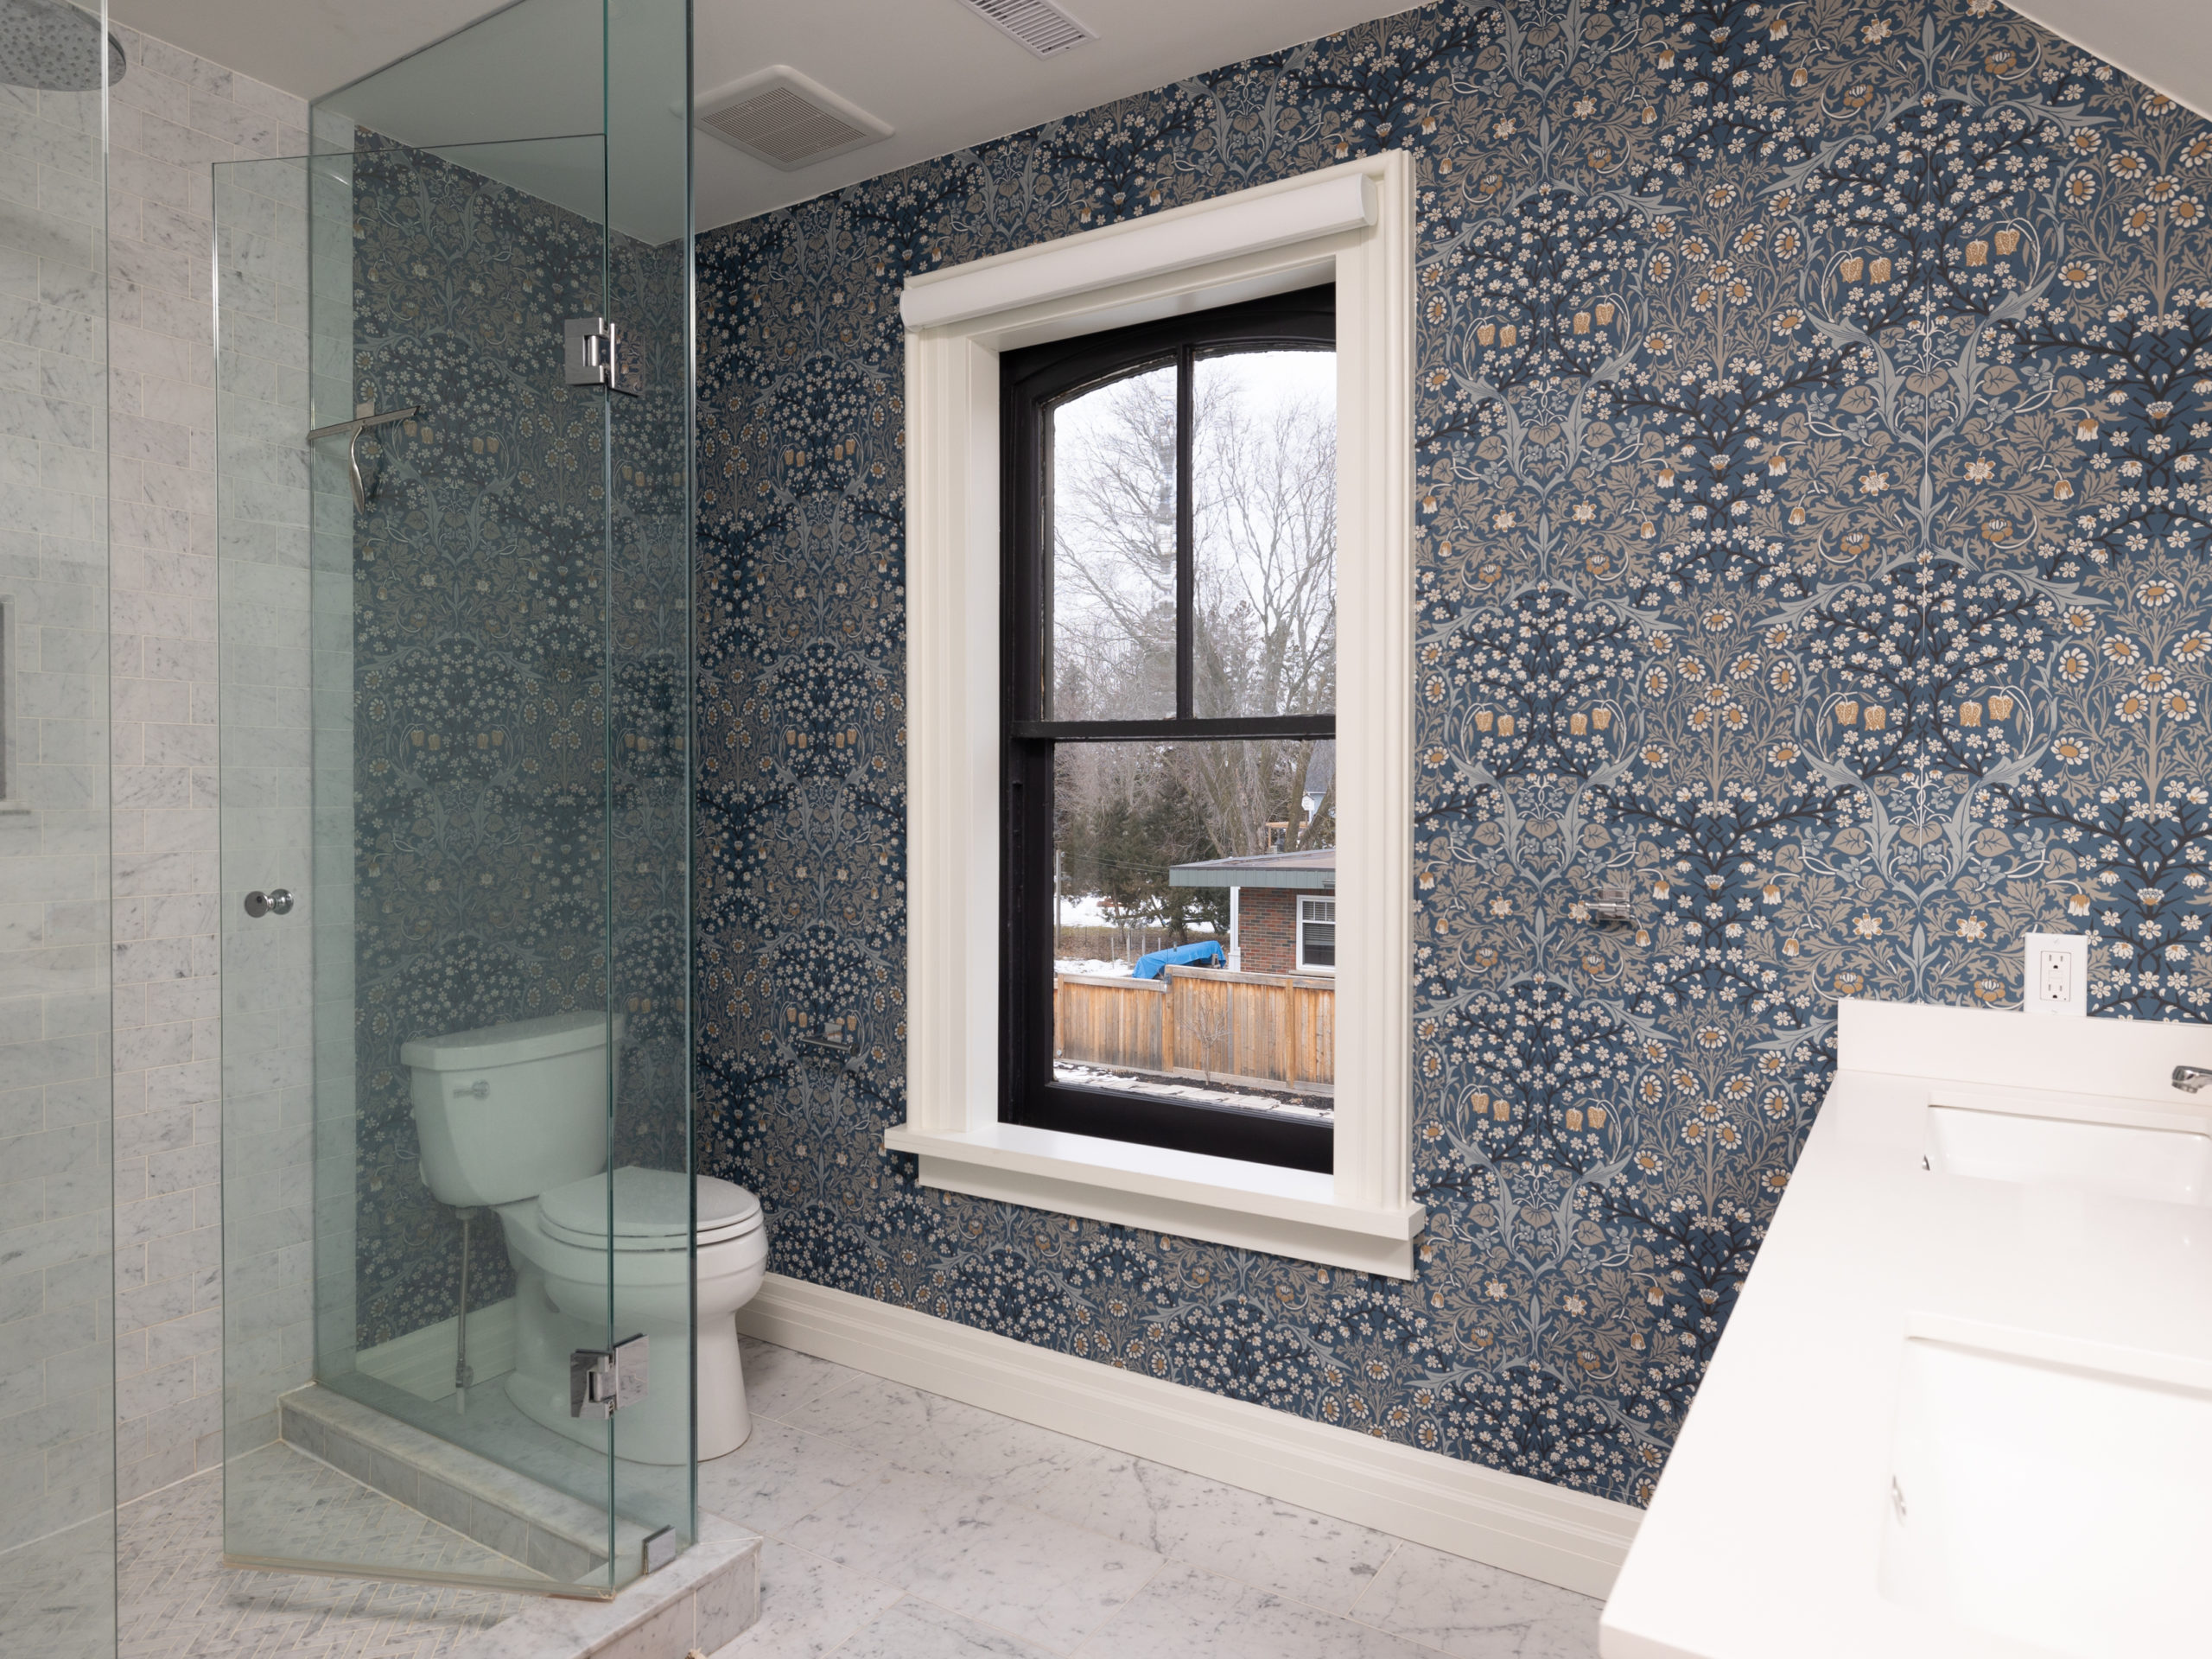 In the ensuite: a glass shower and double vanity. 